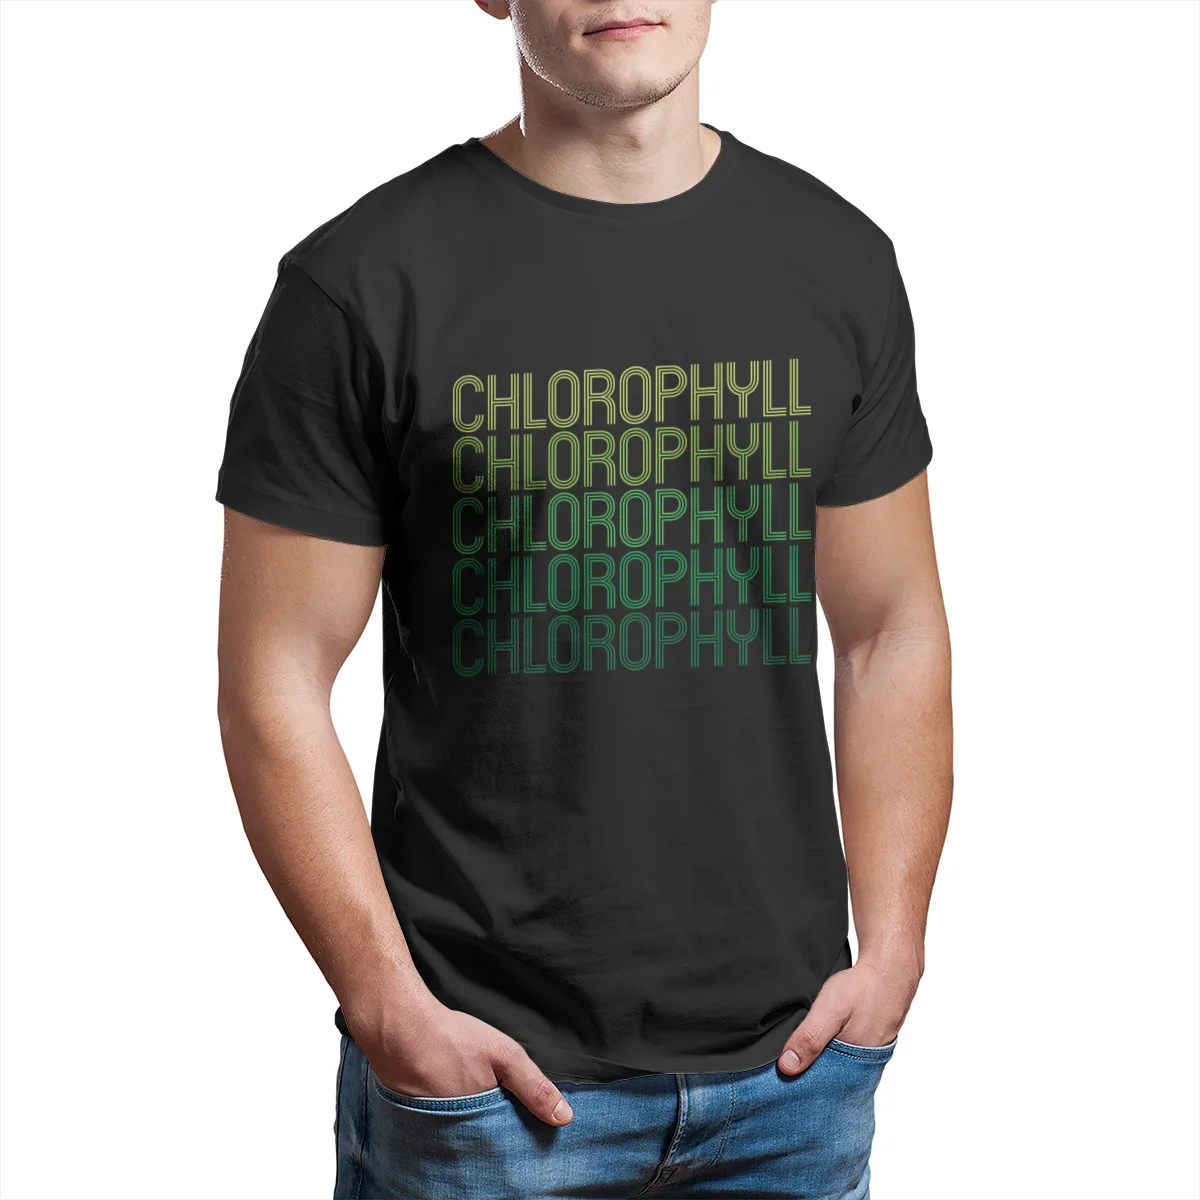 

Chlorophyll Leafy Greens Vegetables Herbs Leaves Vegan 100% Casual loose Cotton 2021 color design graphic Tees 138019